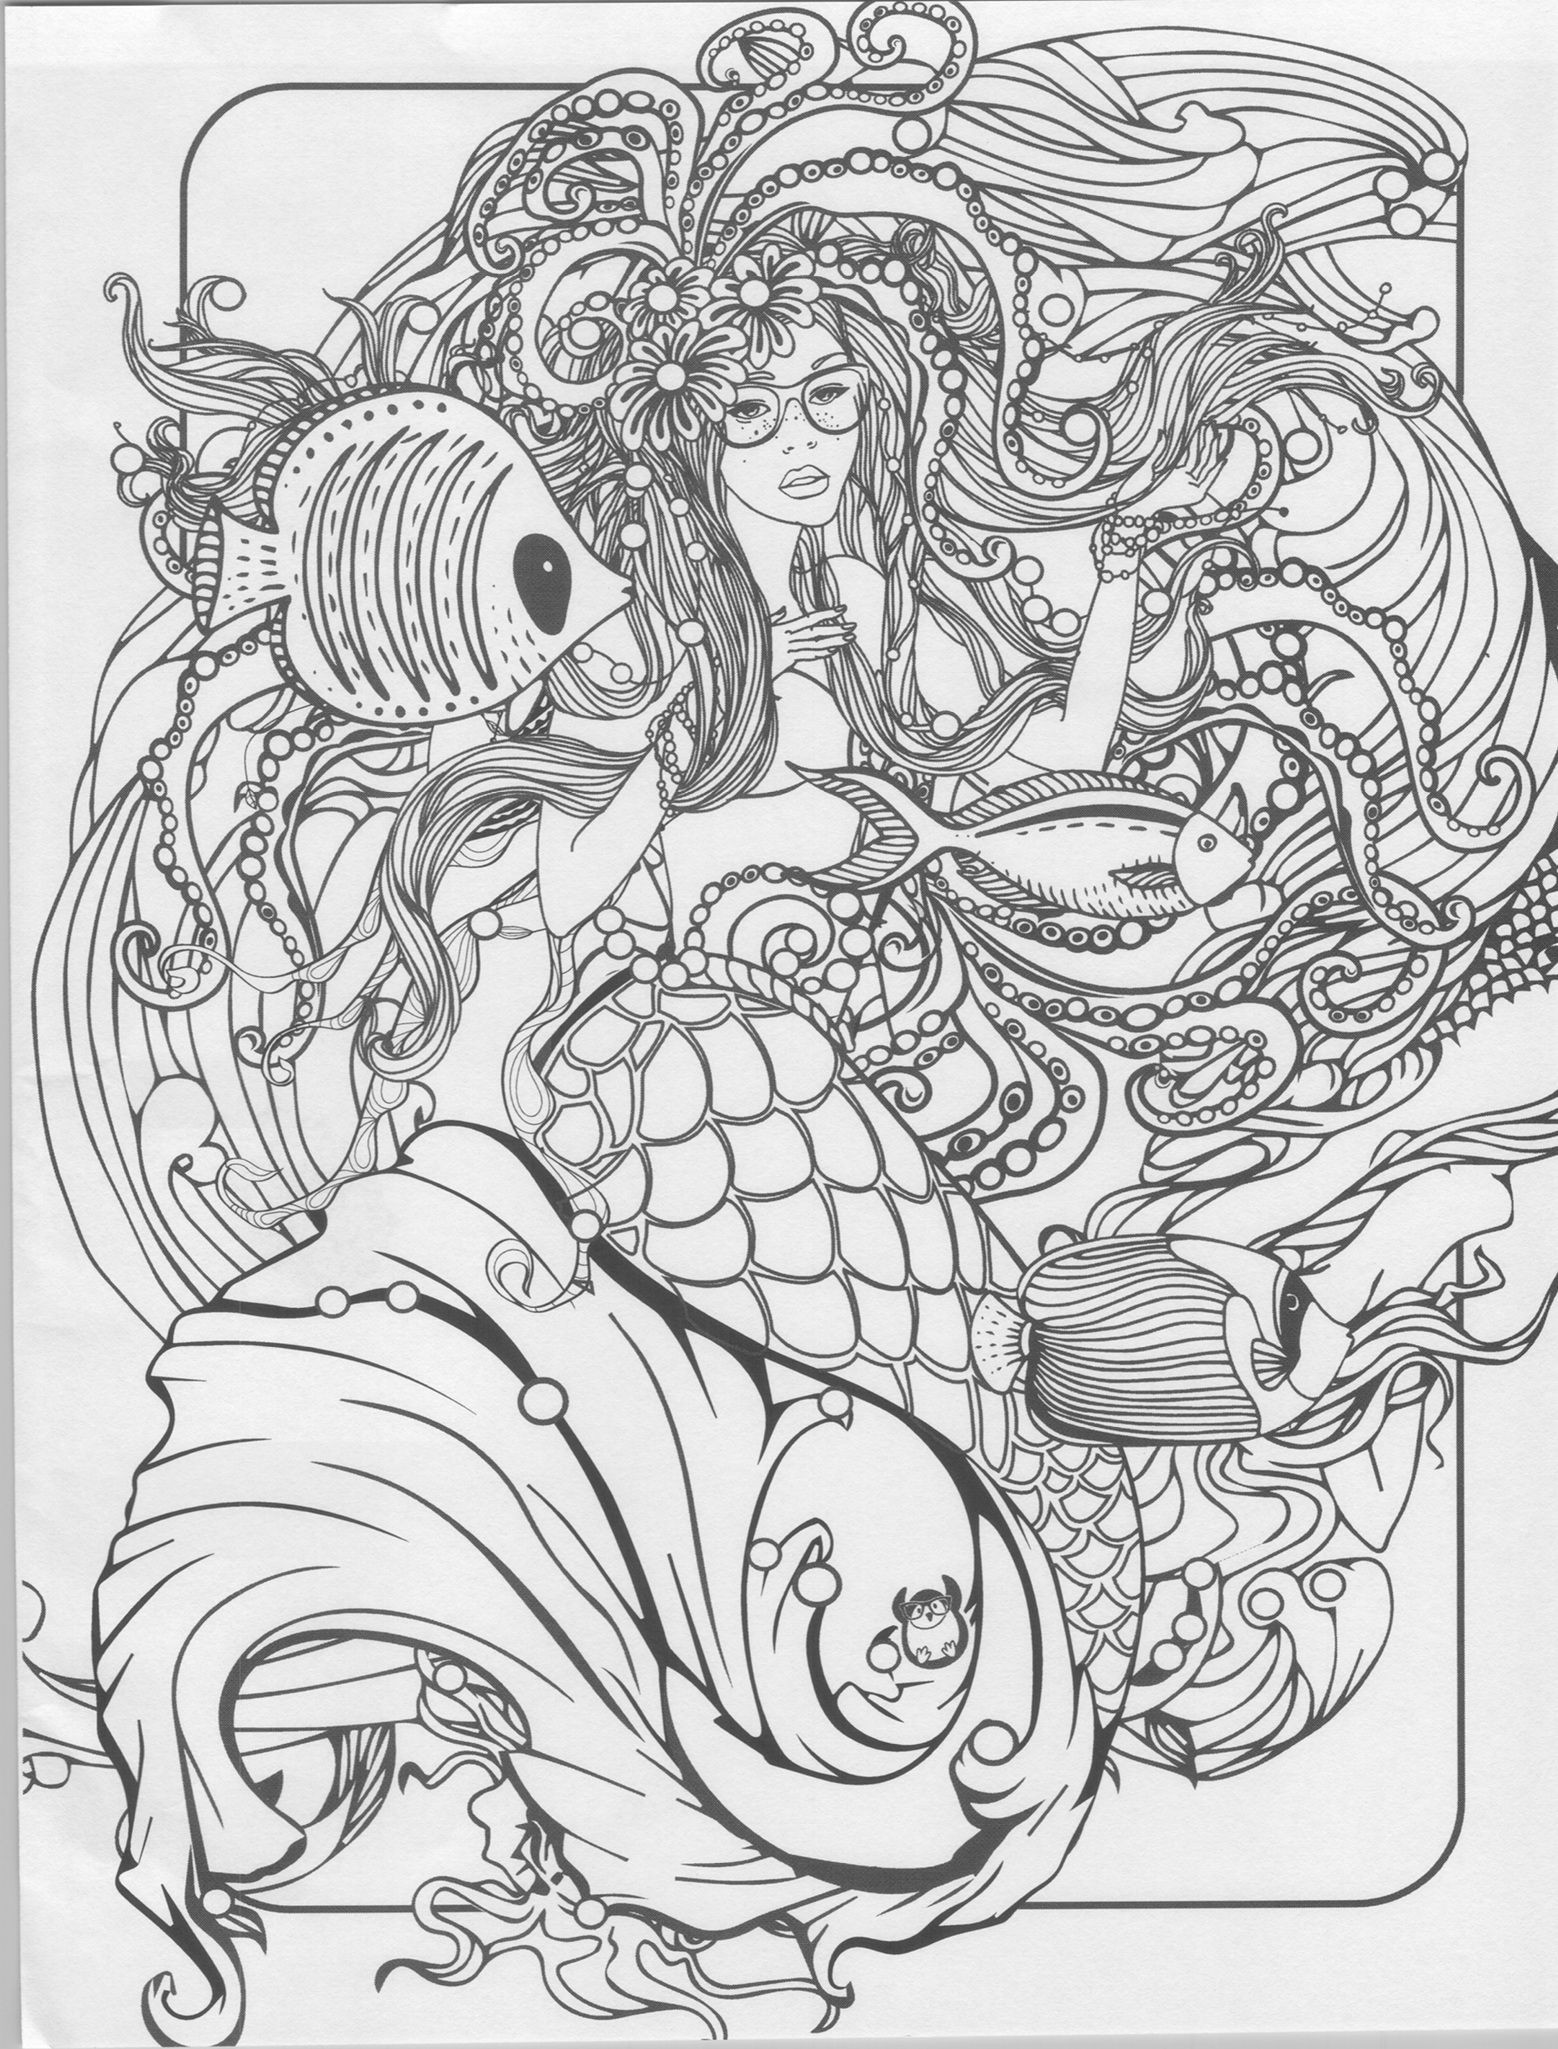 The Best Ideas for Realistic Mermaid Coloring Pages for Adults - Home